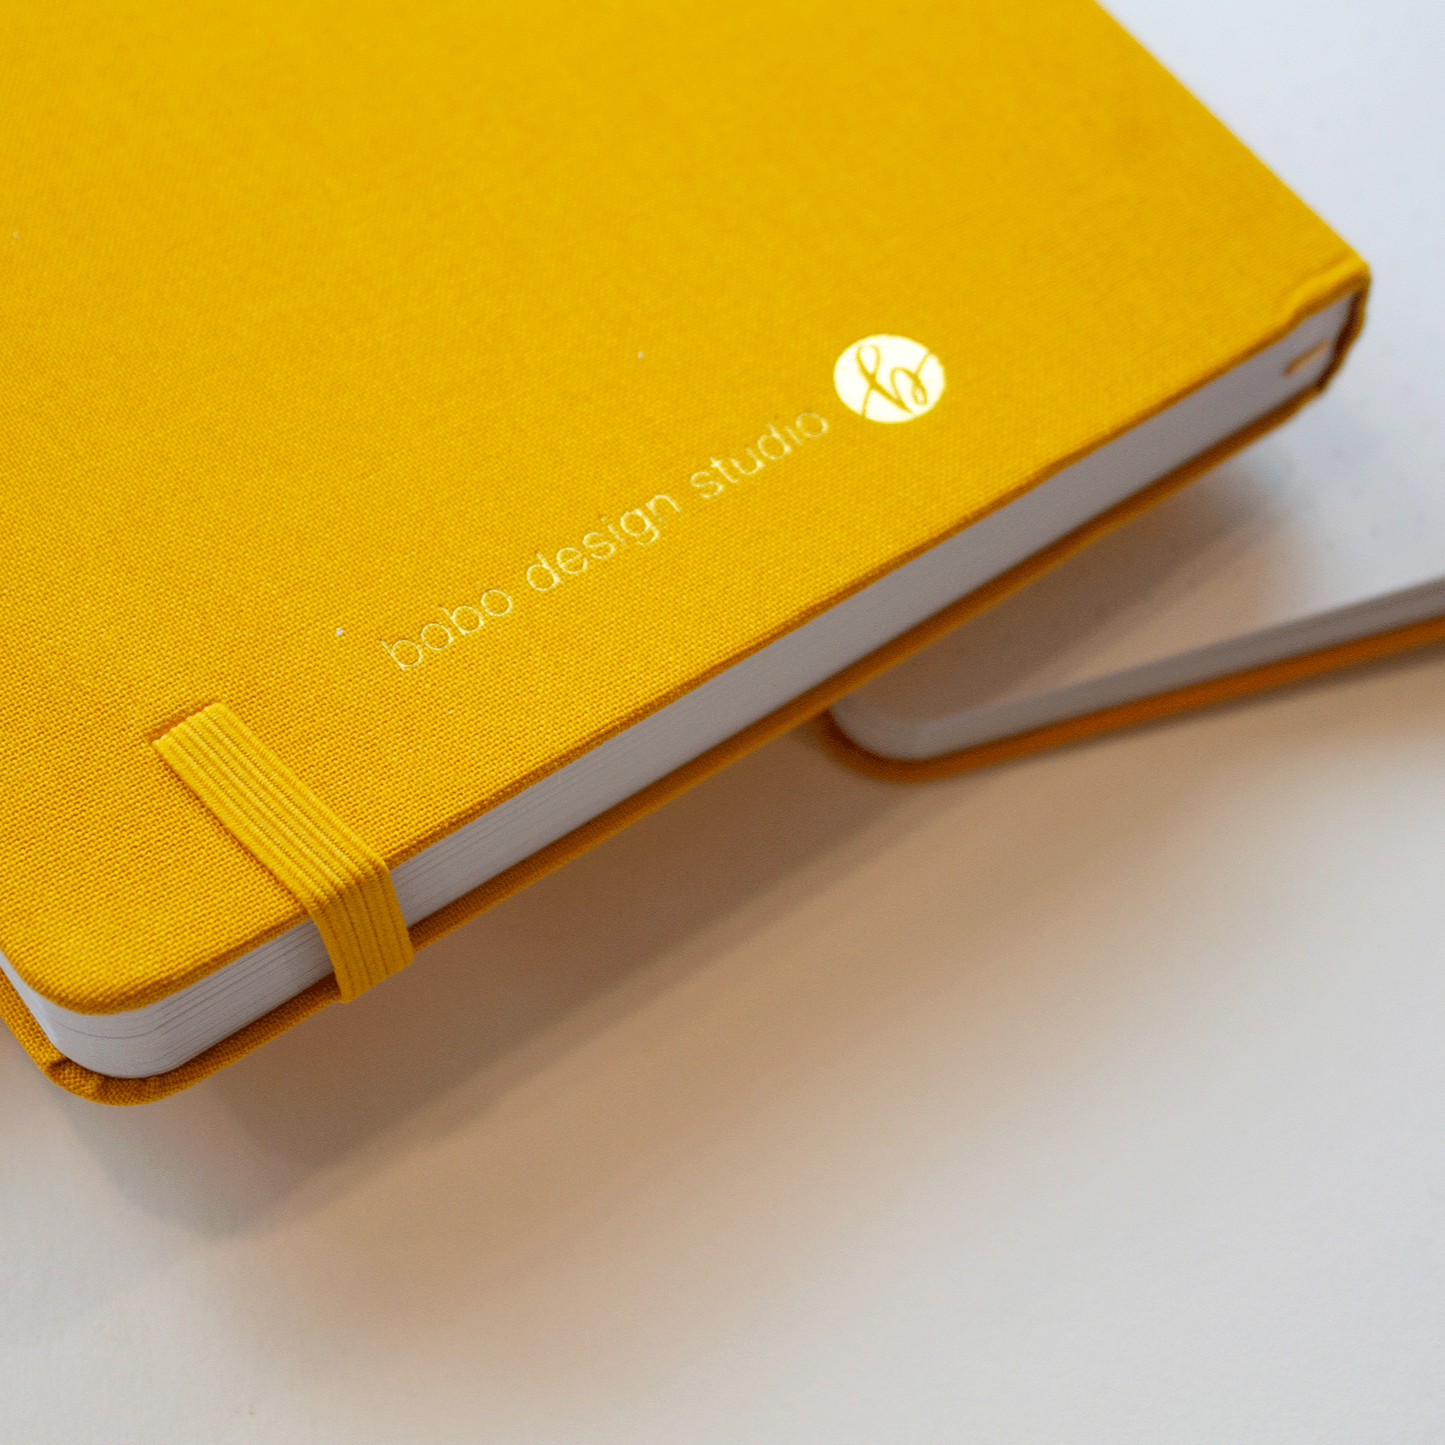 Two Golden Dunes bobo BuJo Dot Grid Journals. The bottom journal is lying open in the background. The journal on top is showing its back cover with the gold stamped text "bobo design studio" and logo of a cursive lowercase b in a circle. The end point where the yellow elastic closure fits into the yellow linen cover is visible.